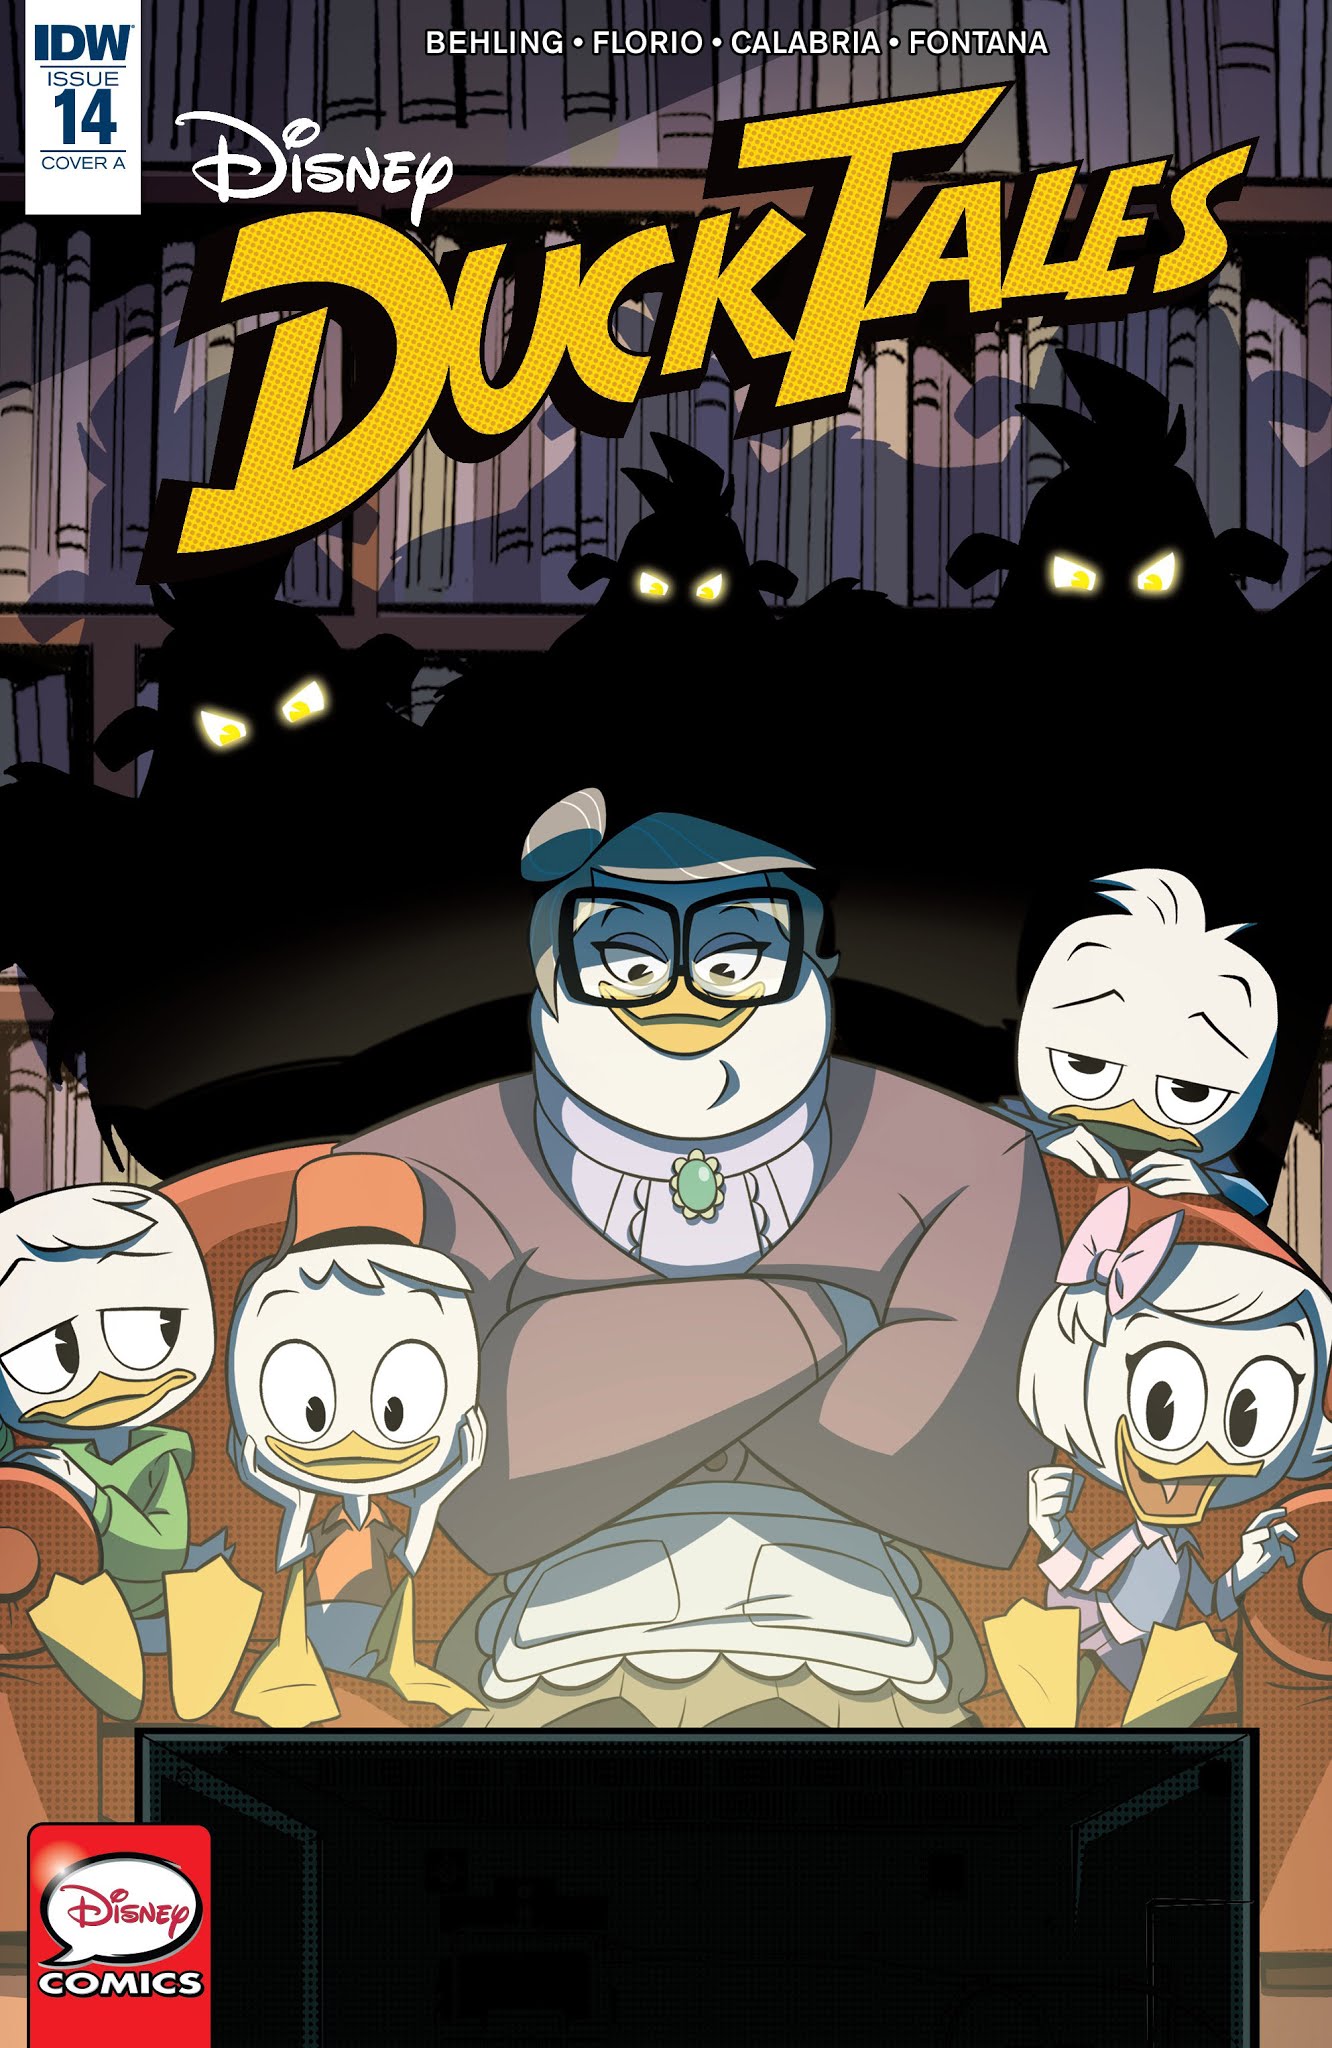 Ducktales 17 Issue 14 Read Ducktales 17 Issue 14 Comic Online In High Quality Read Full Comic Online For Free Read Comics Online In High Quality